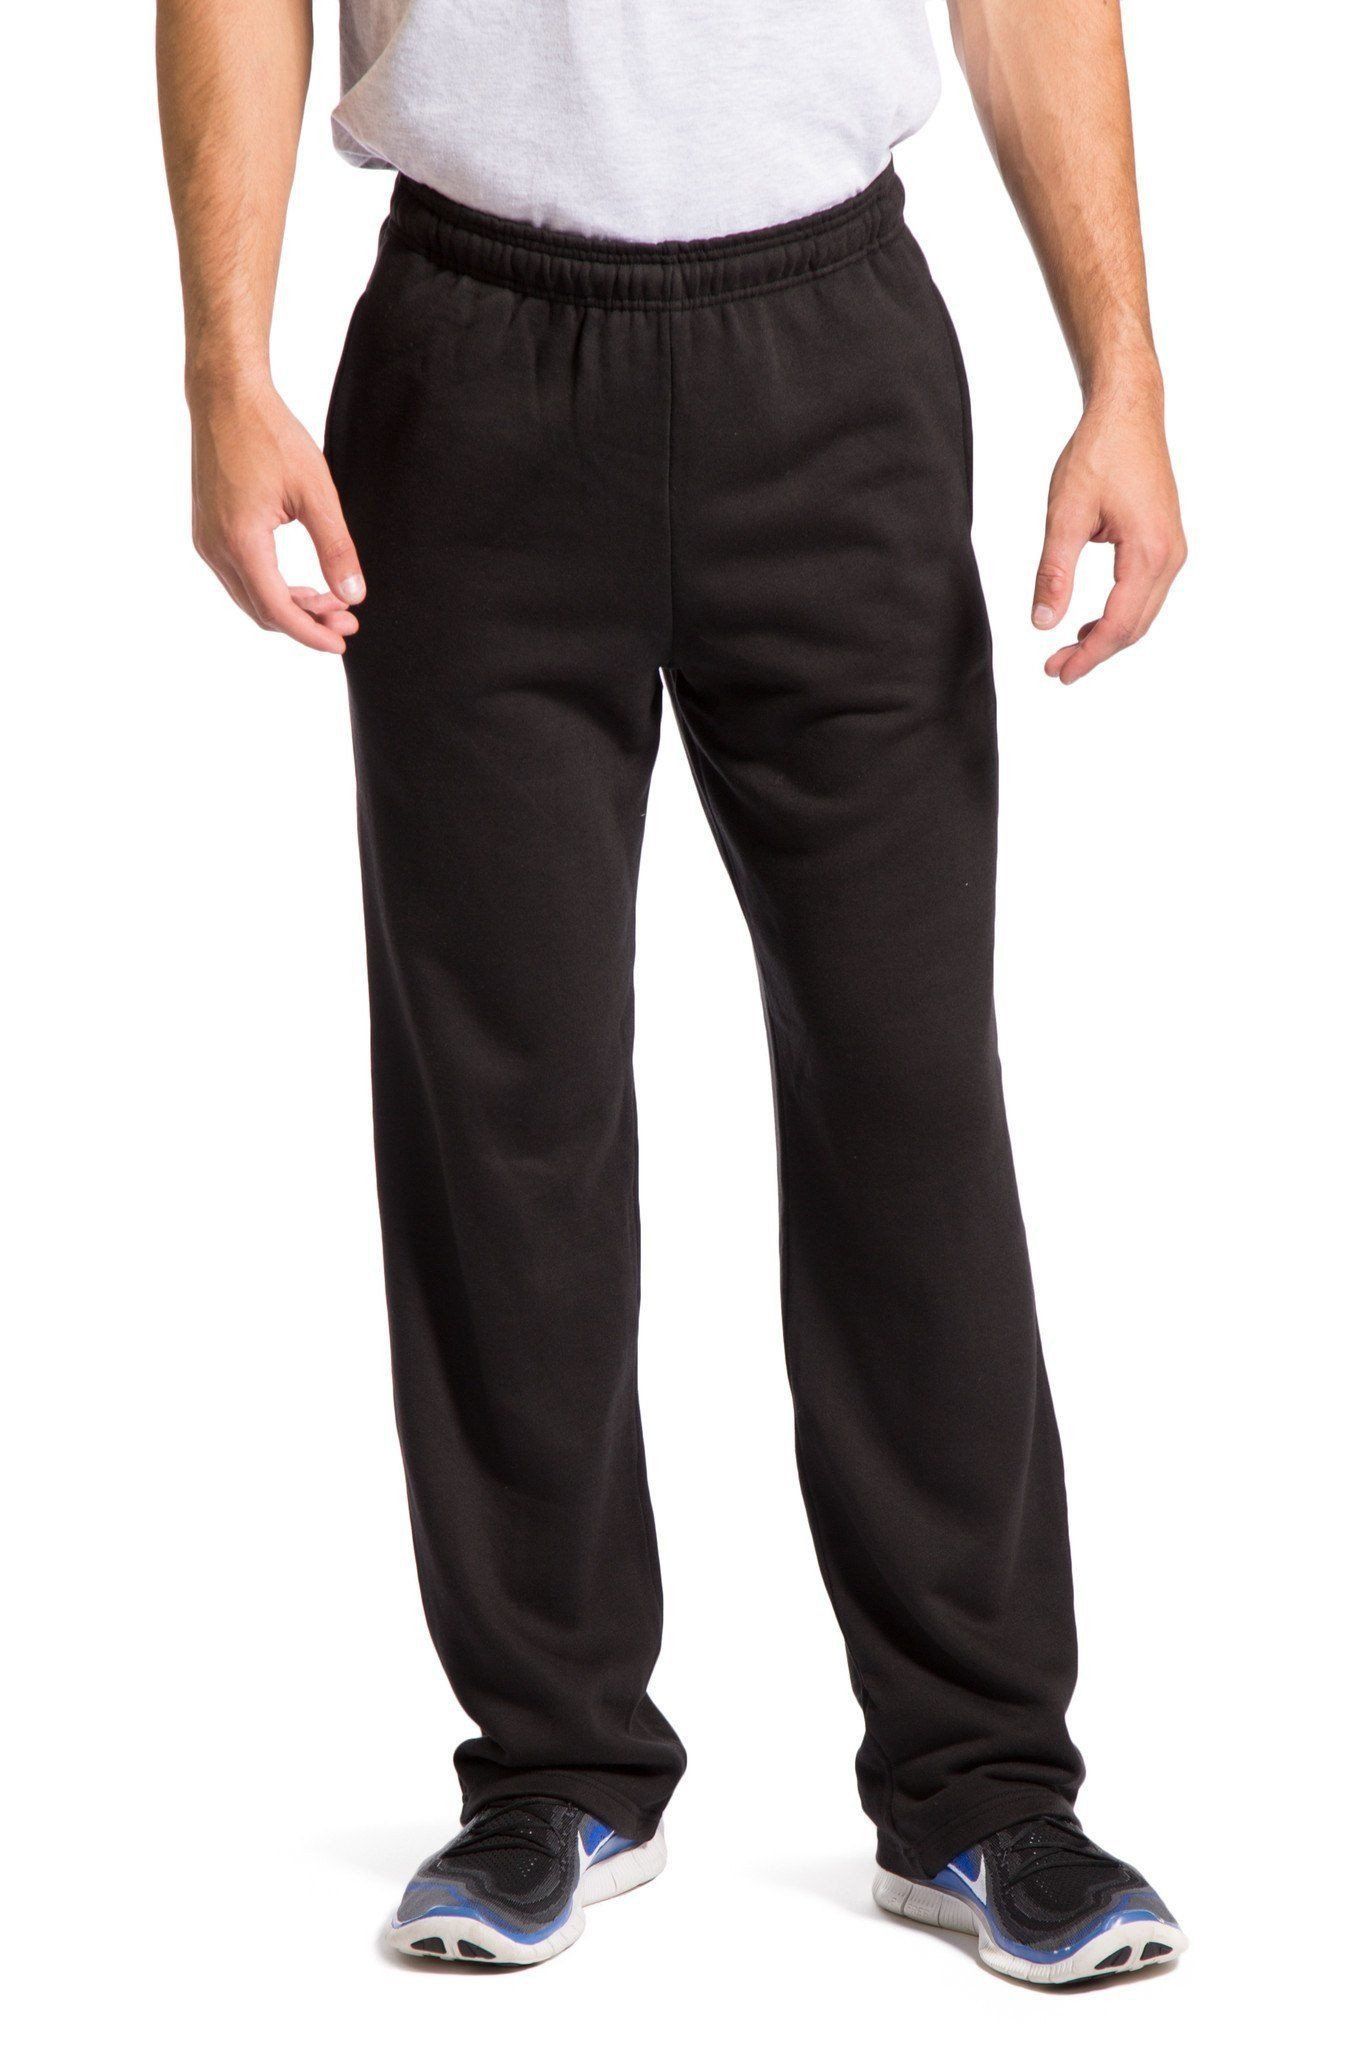 Noble Mount Men's Fleece Lined French Terry Lounge Pant